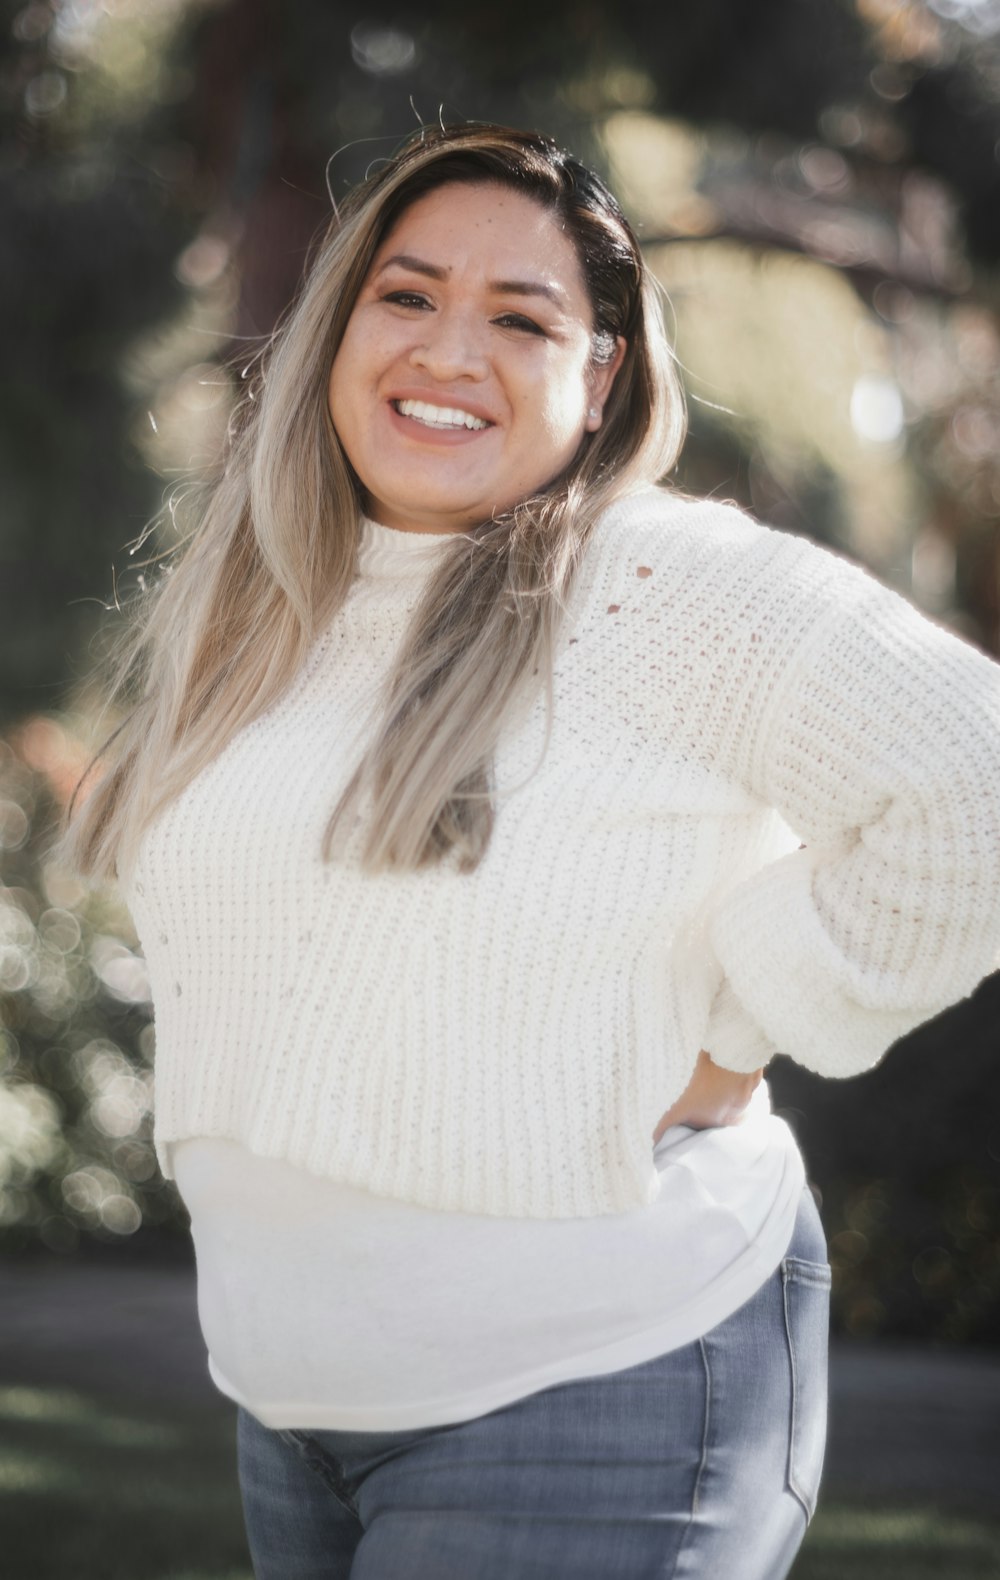 a smiling woman in a white sweater and jeans